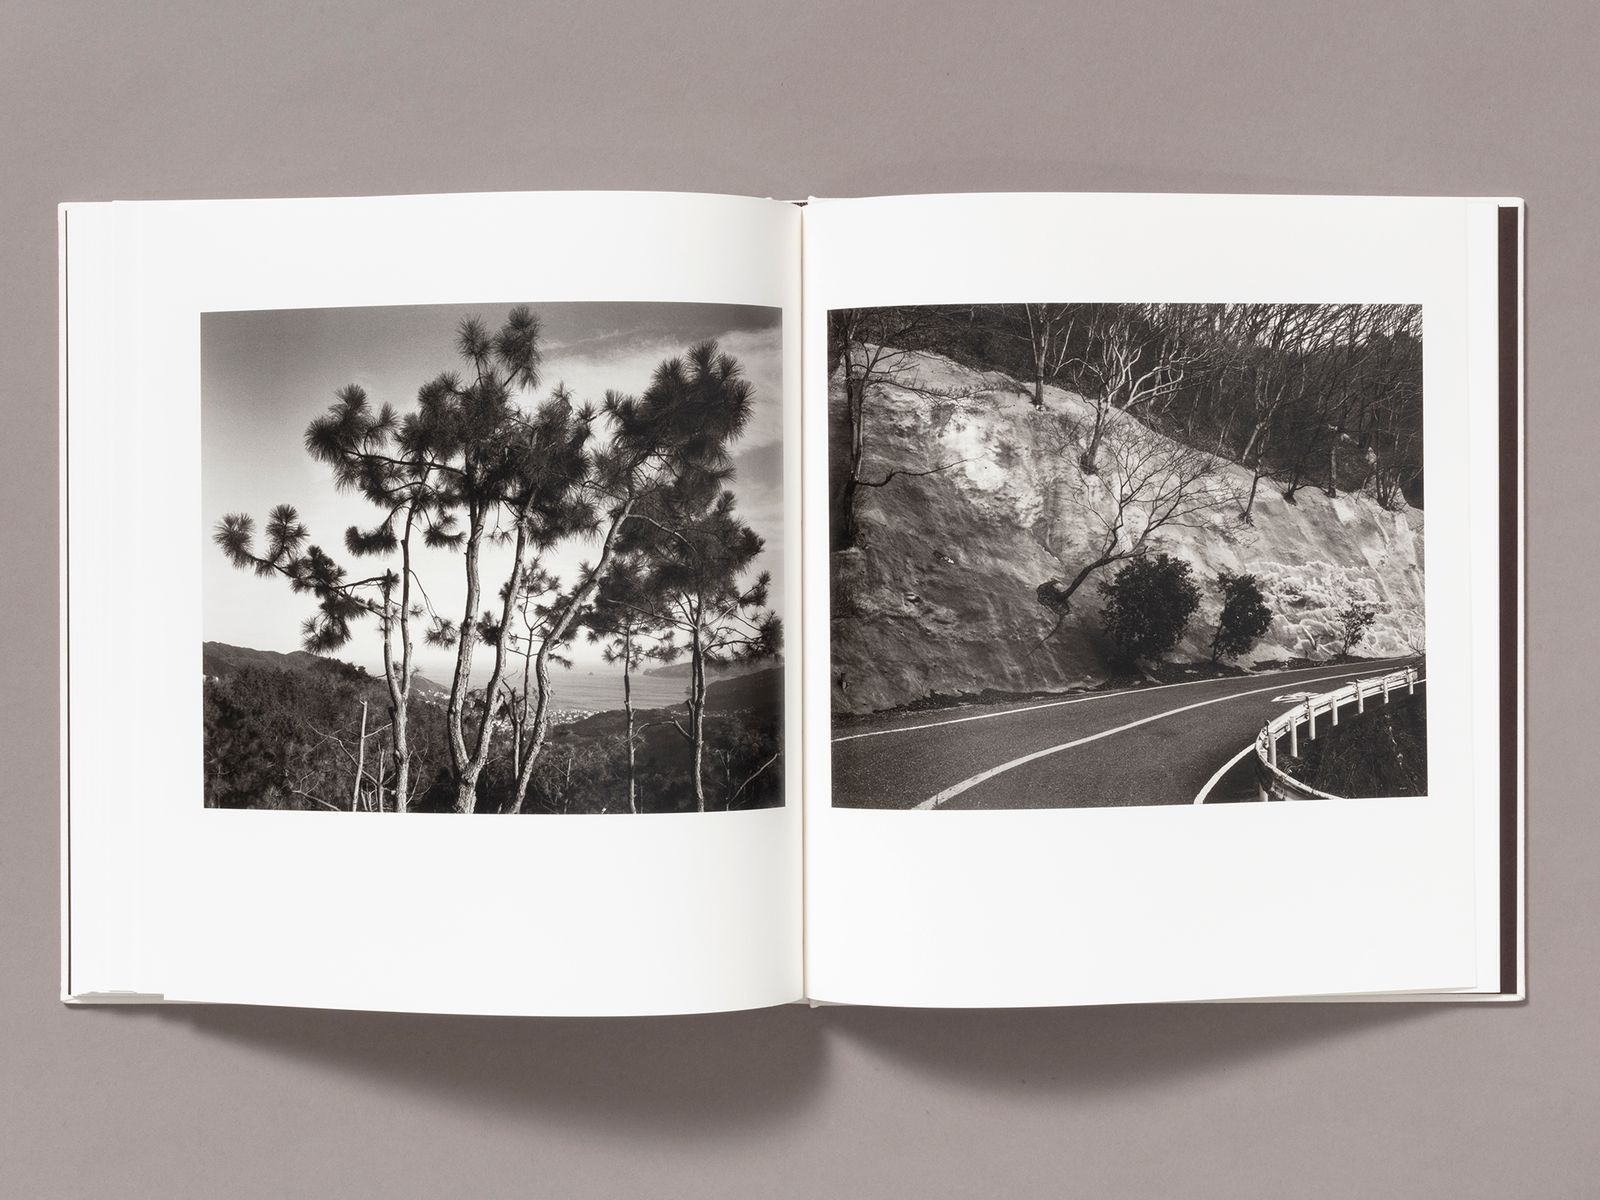 Photobook Review: Day for Night by Toshio Shibata